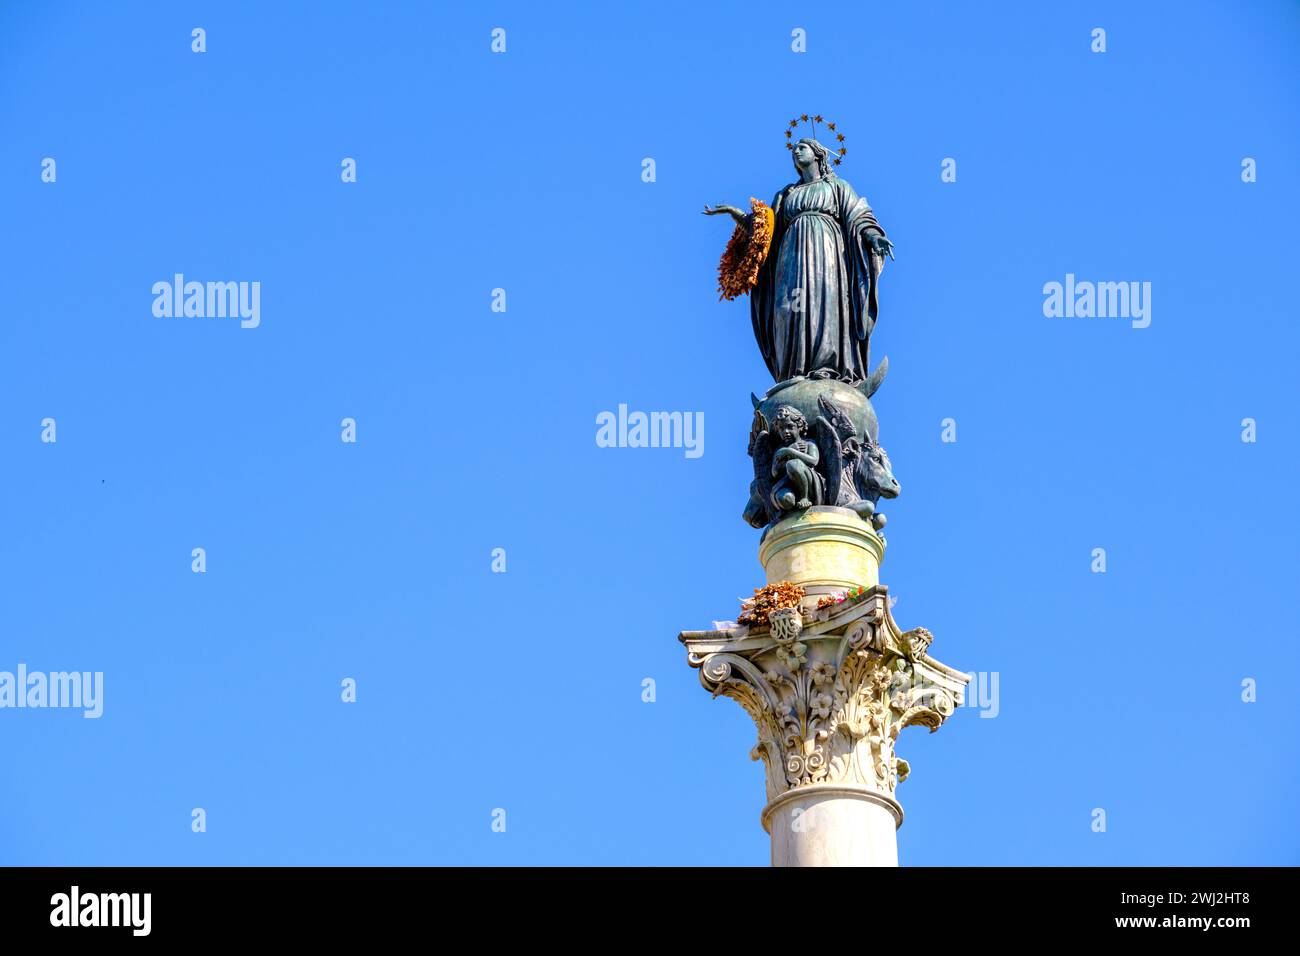 Statue at the top of the Column of the Immaculate Conception in Rome Stock Photo